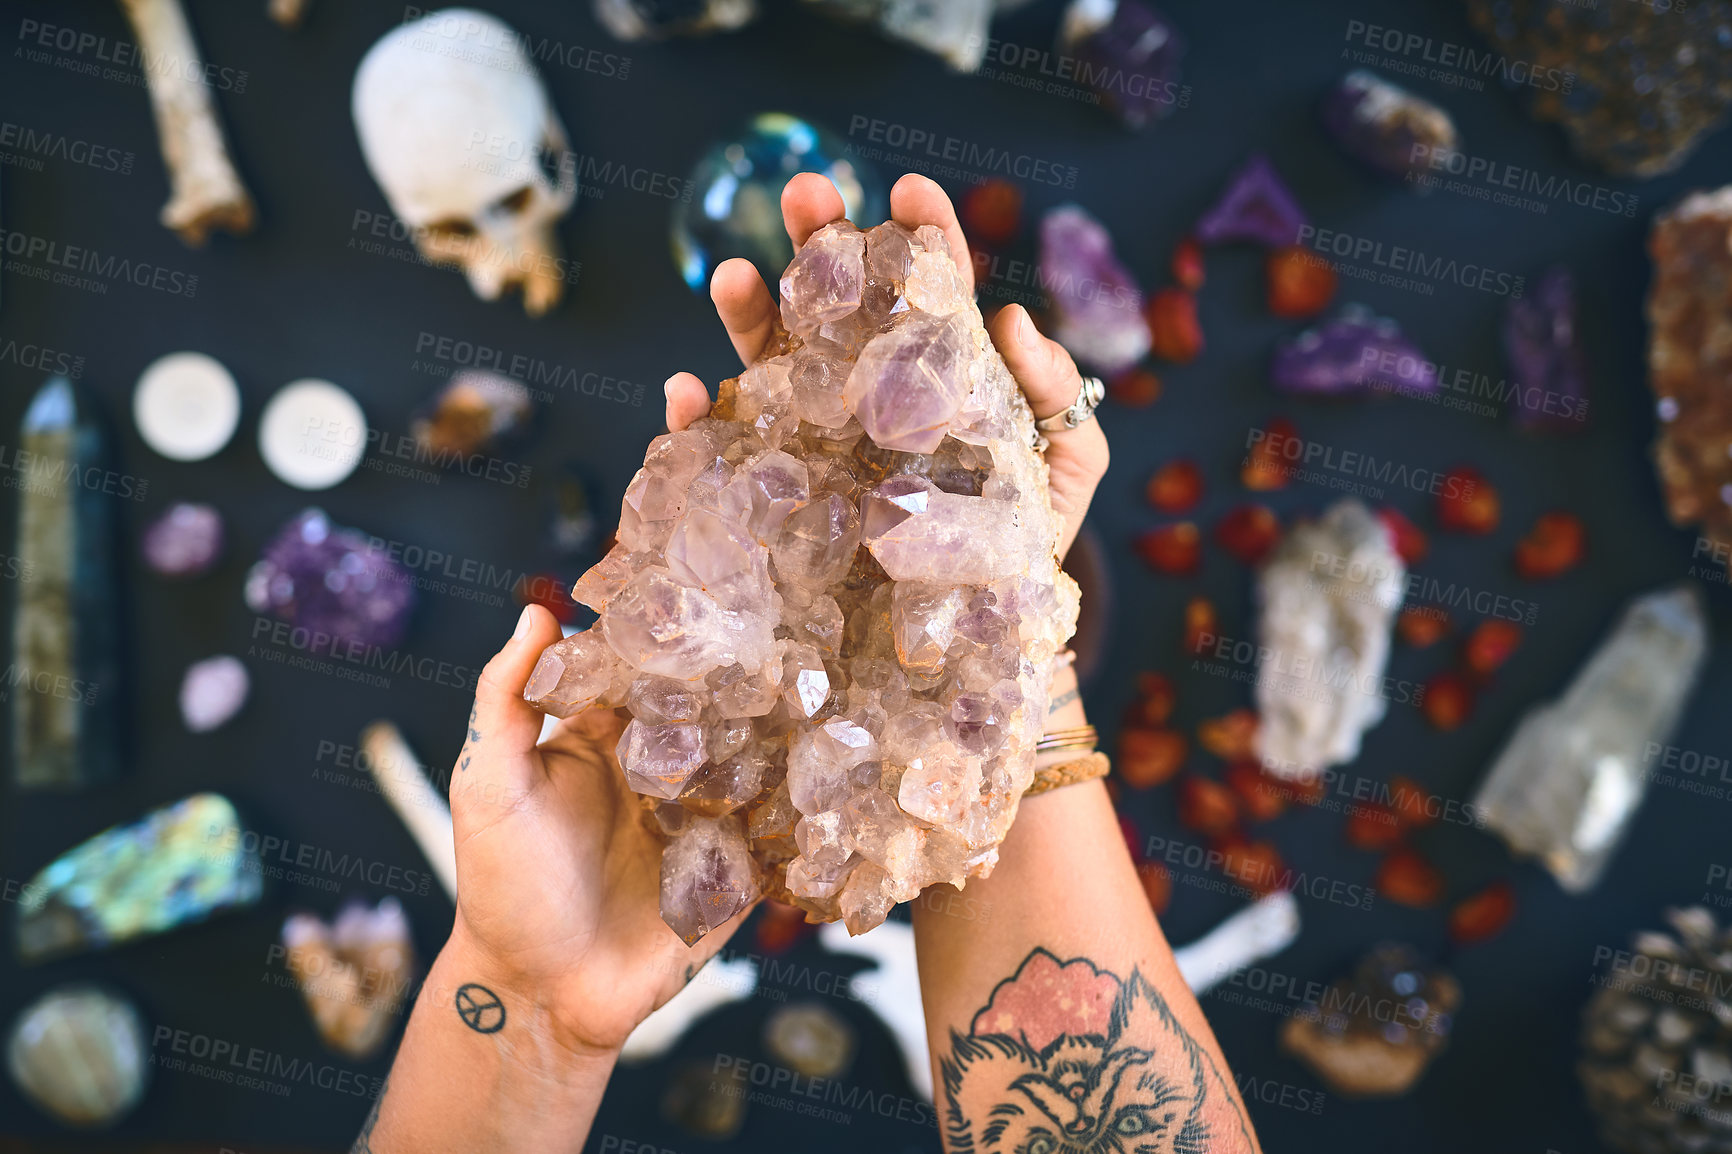 Buy stock photo Closeup of an unrecognizable person holding a crystal with two hands over a table filled with more crystals inside during the day